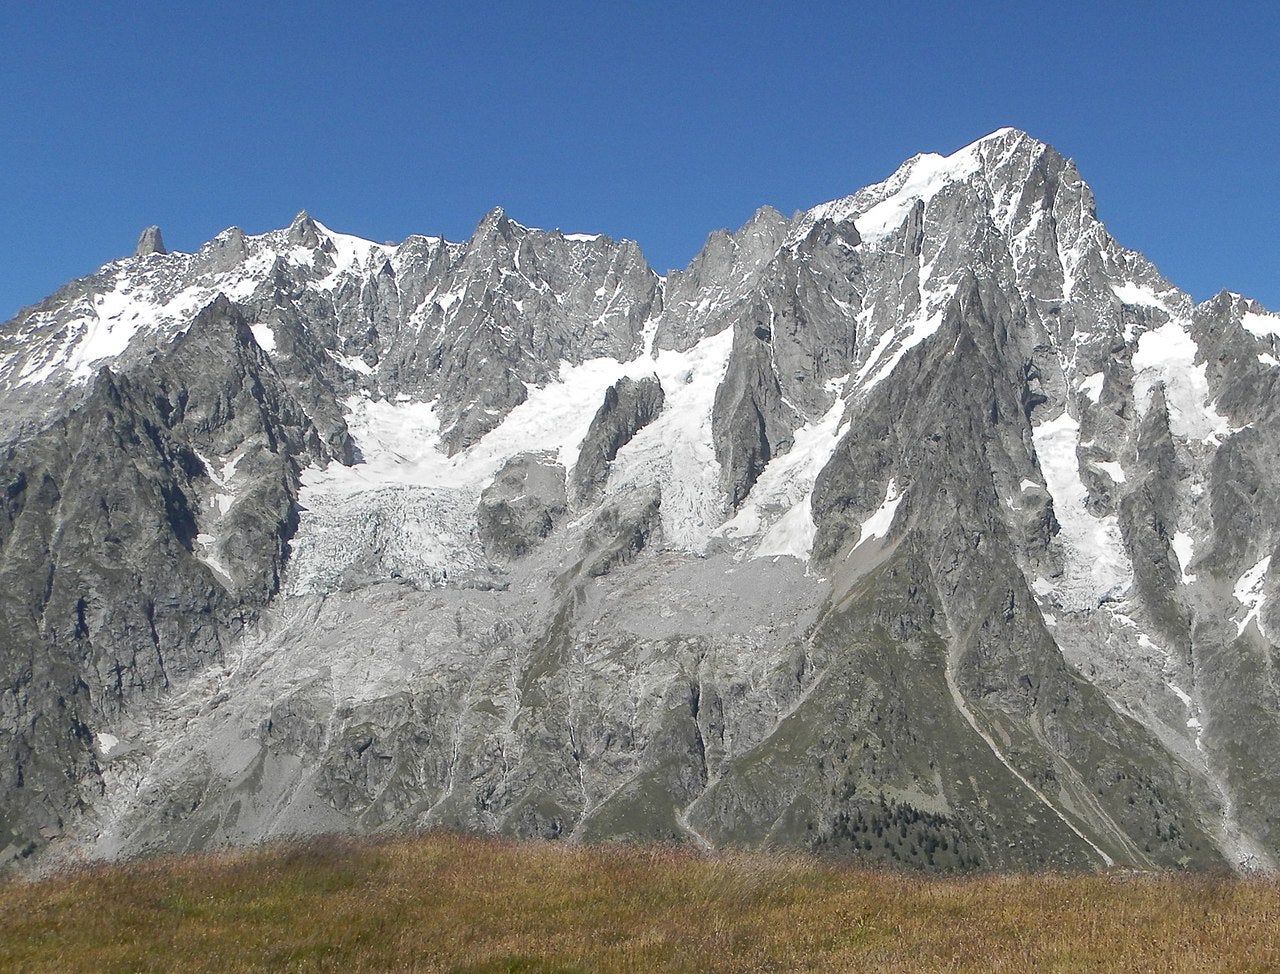 The Planpincieux glacier (seen on the left) on the southern slopes of the Grandes Jorasses in the Mont Blanc massif